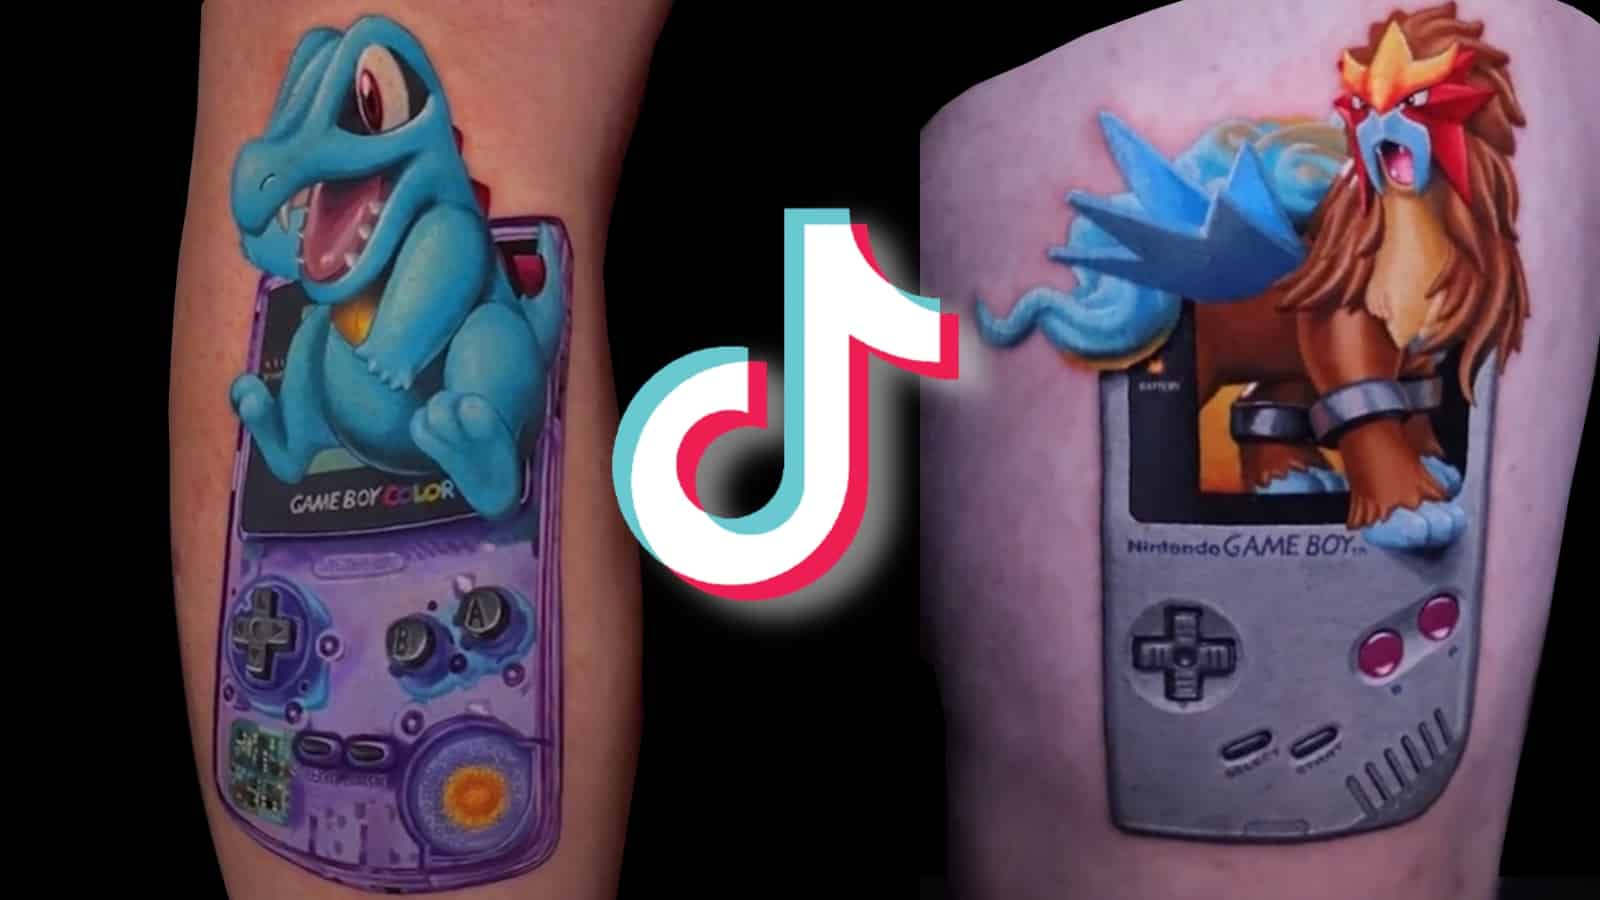 Here's a video of the Charmander Gameboy I tattooed. I'd love to do more  like this | By Dan McWilliamsFacebook